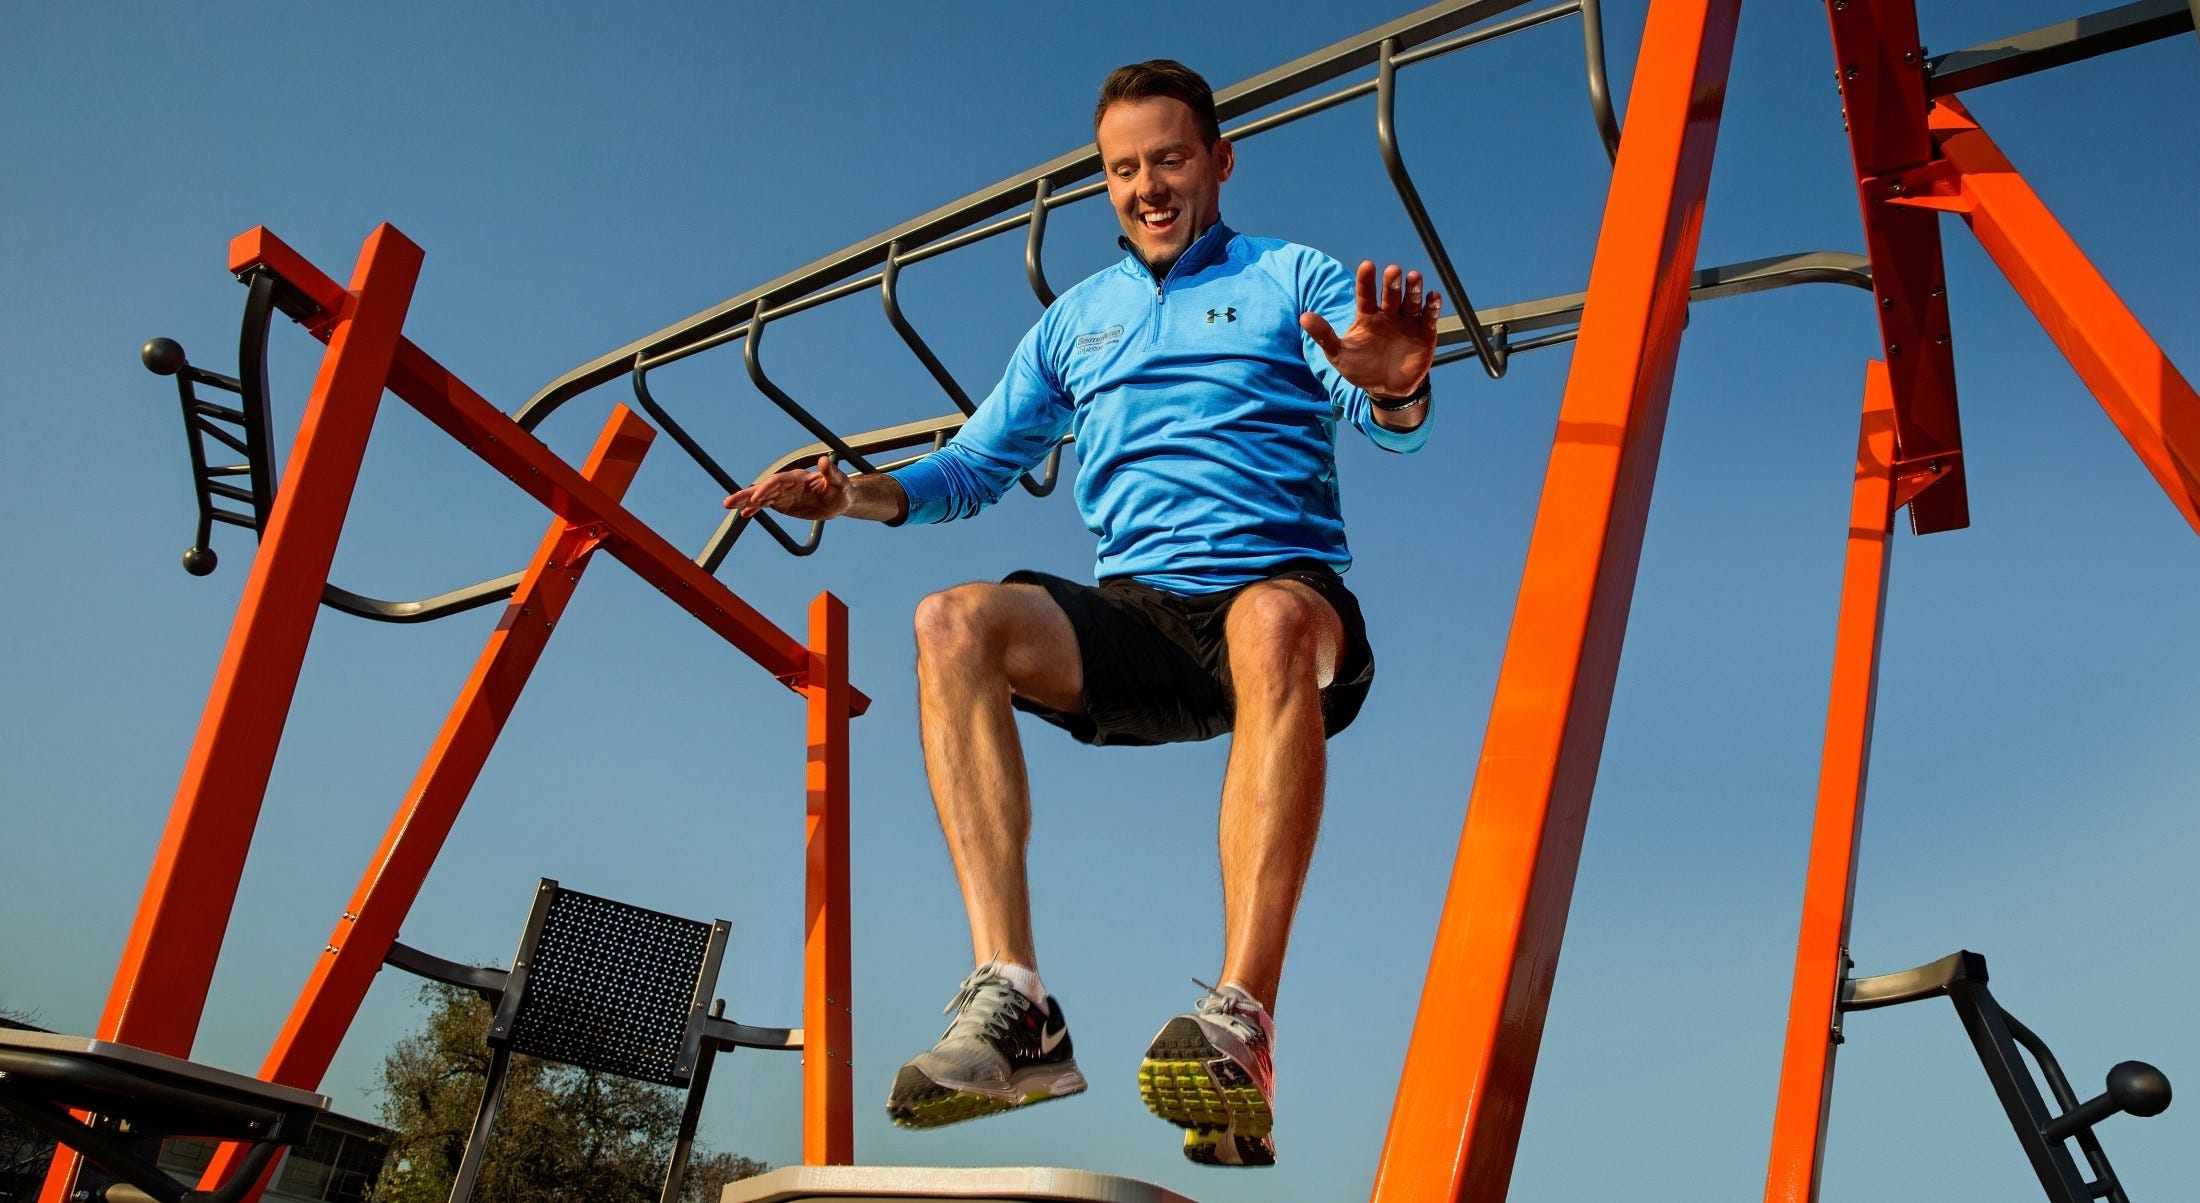 Improving health and wellbeing through outdoor fitness parks